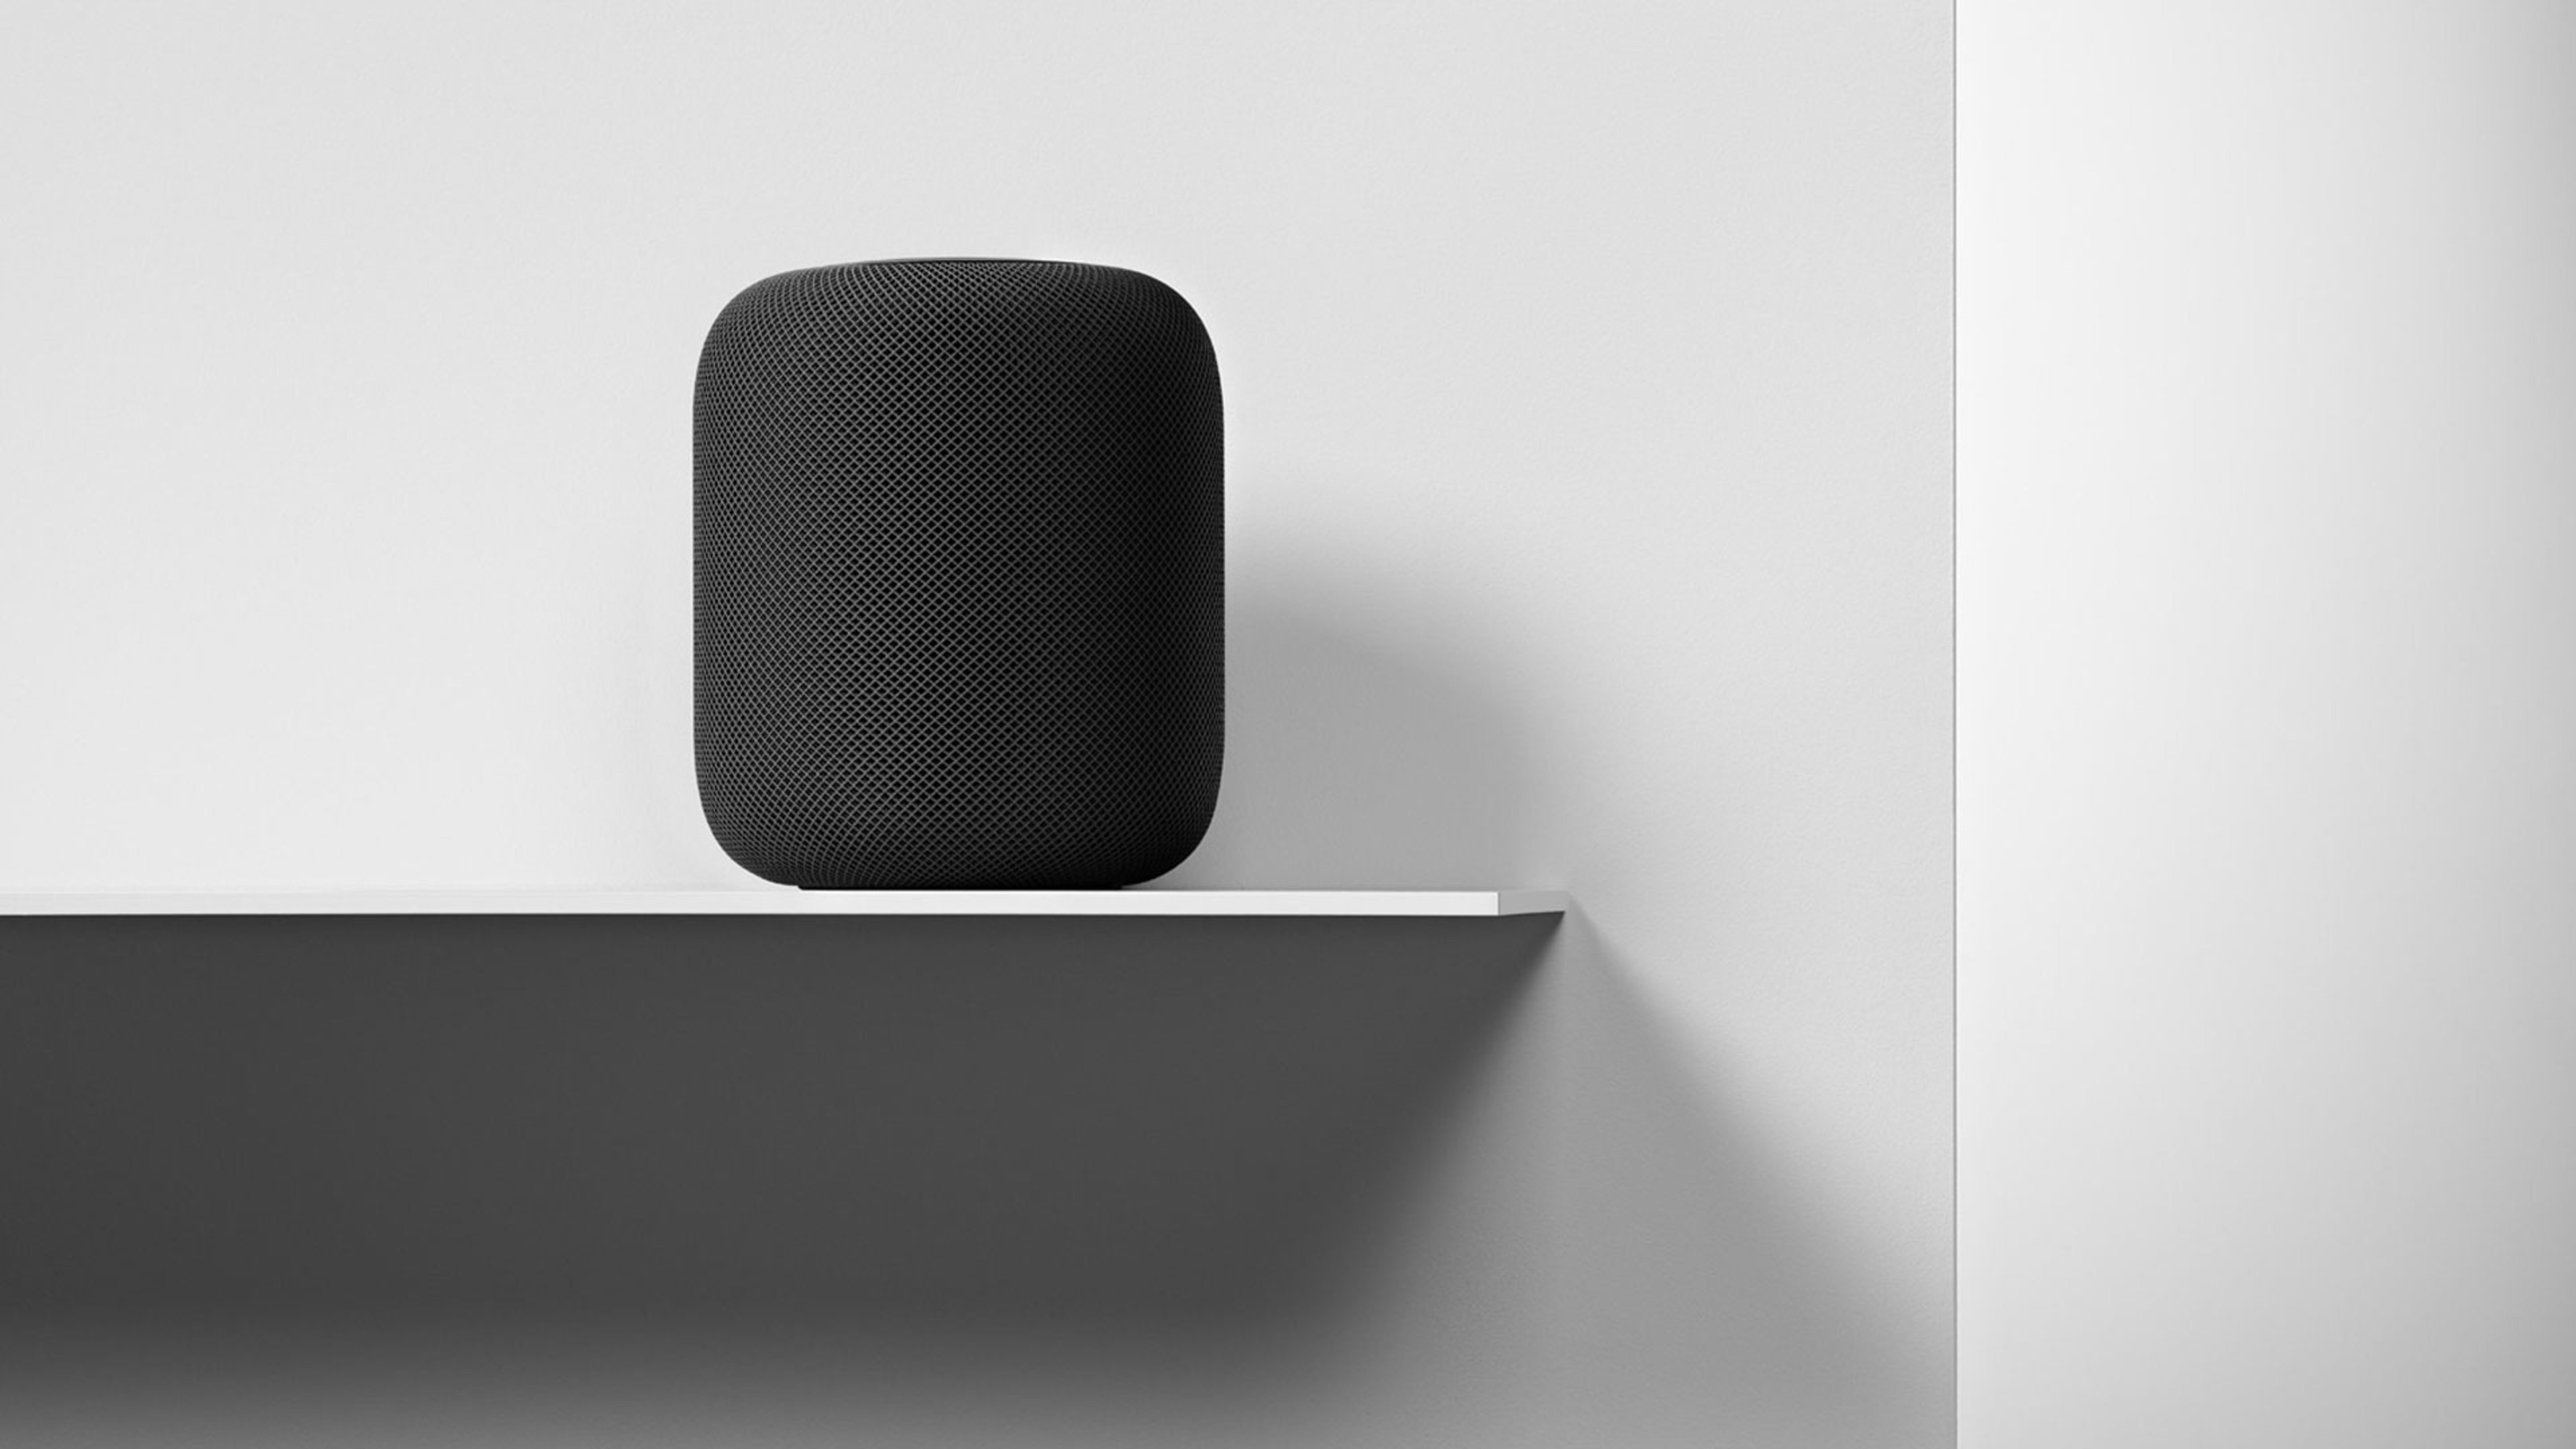 Apple’s HomePod is (easily) summed up by these five review excerpts